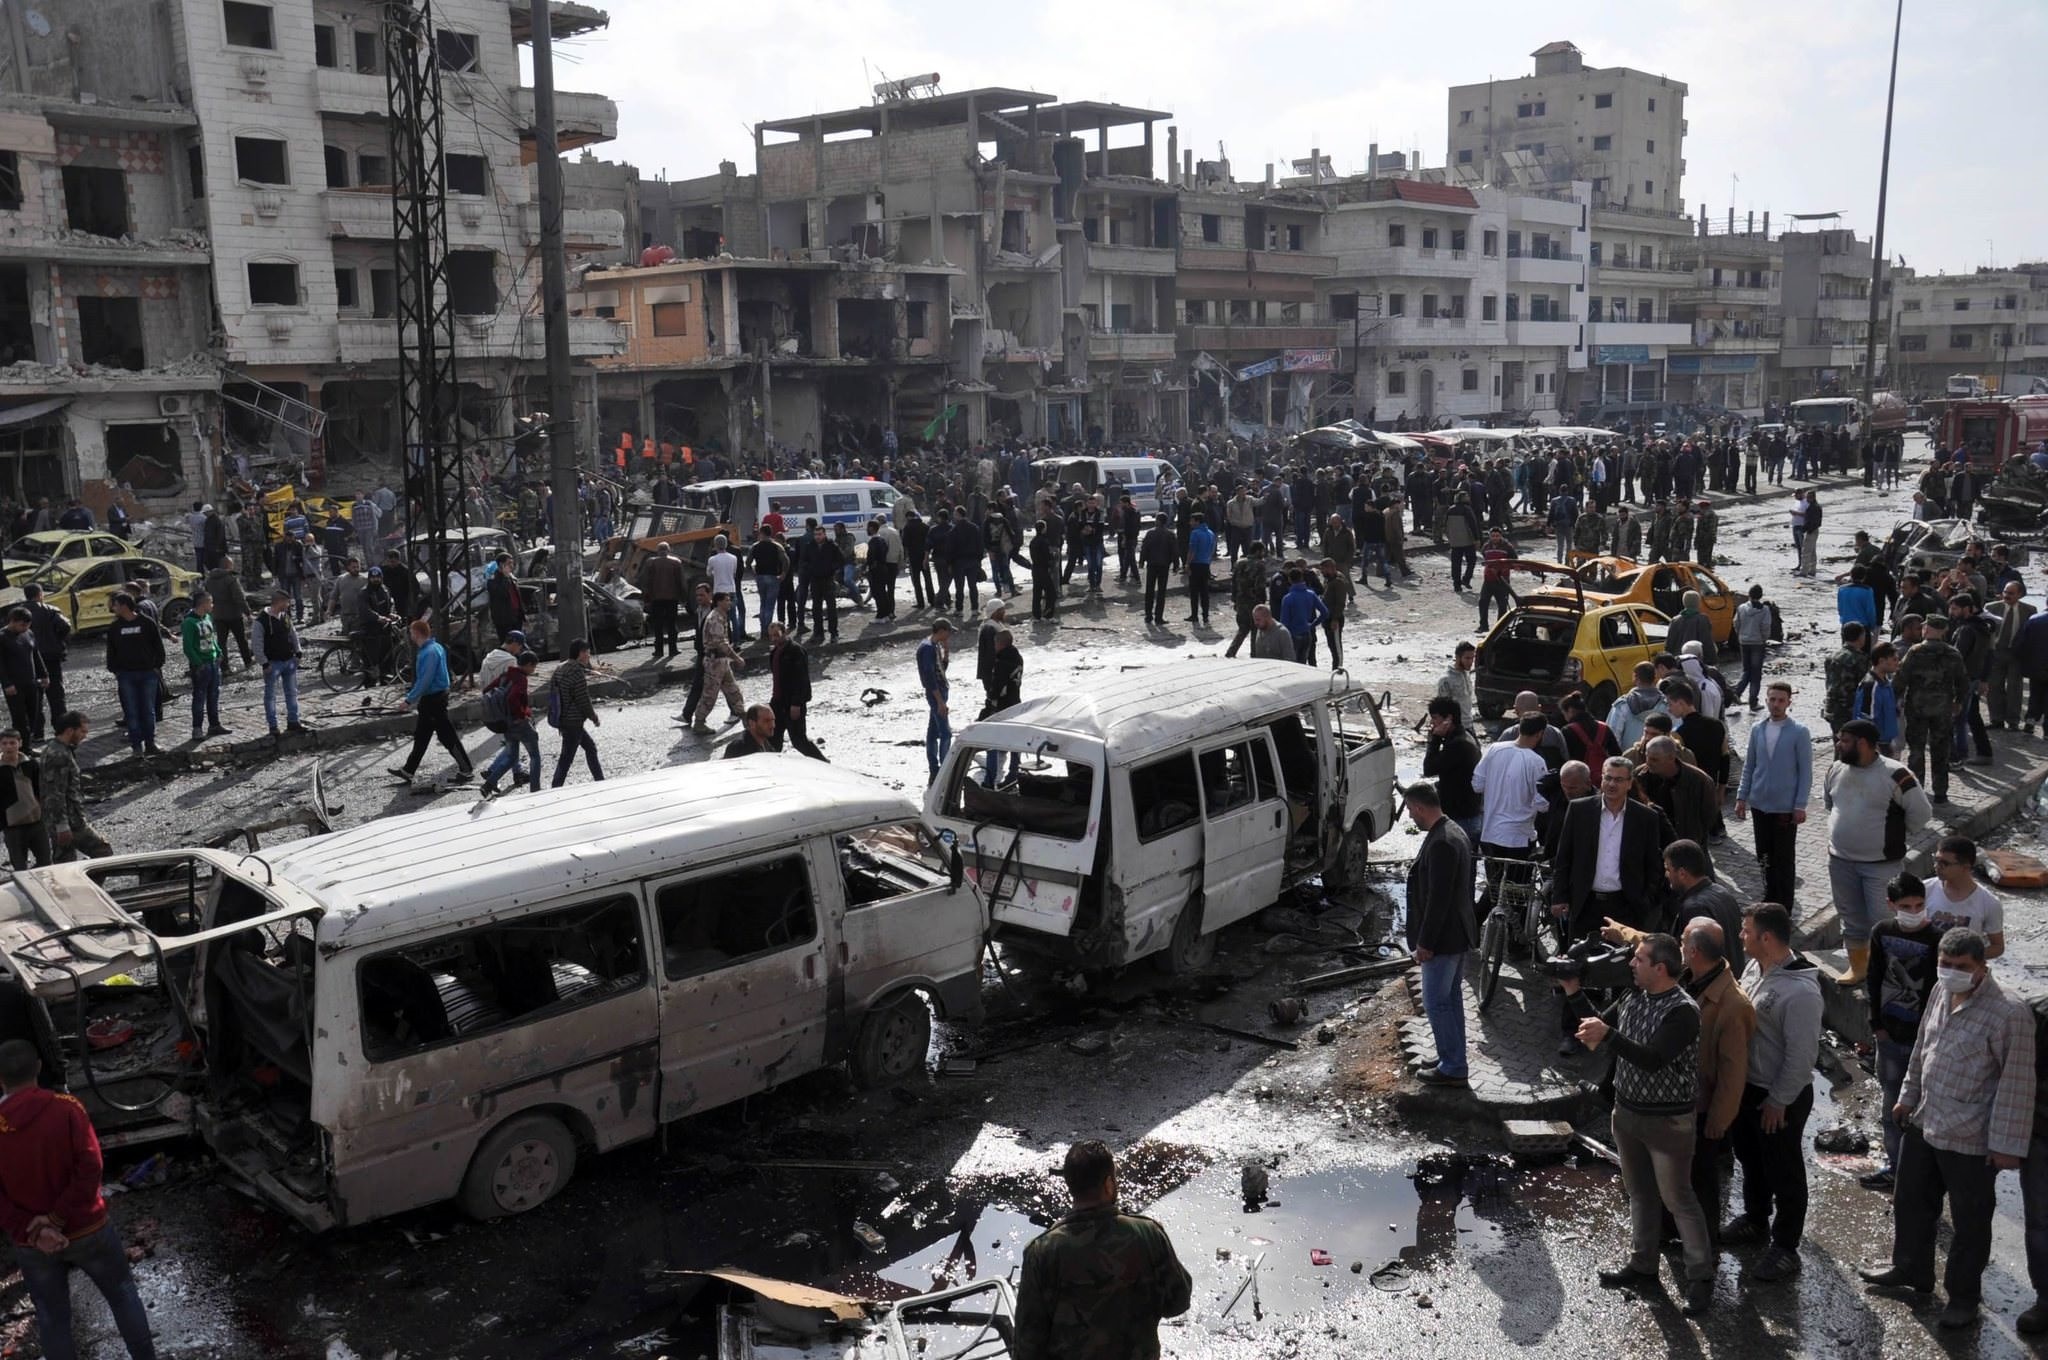 yrians gather at the site of a double car bomb attack in the Al-Zahraa neighbourhood of the central Syrian city of Homs on February 21, 2016. (AFP Photo)